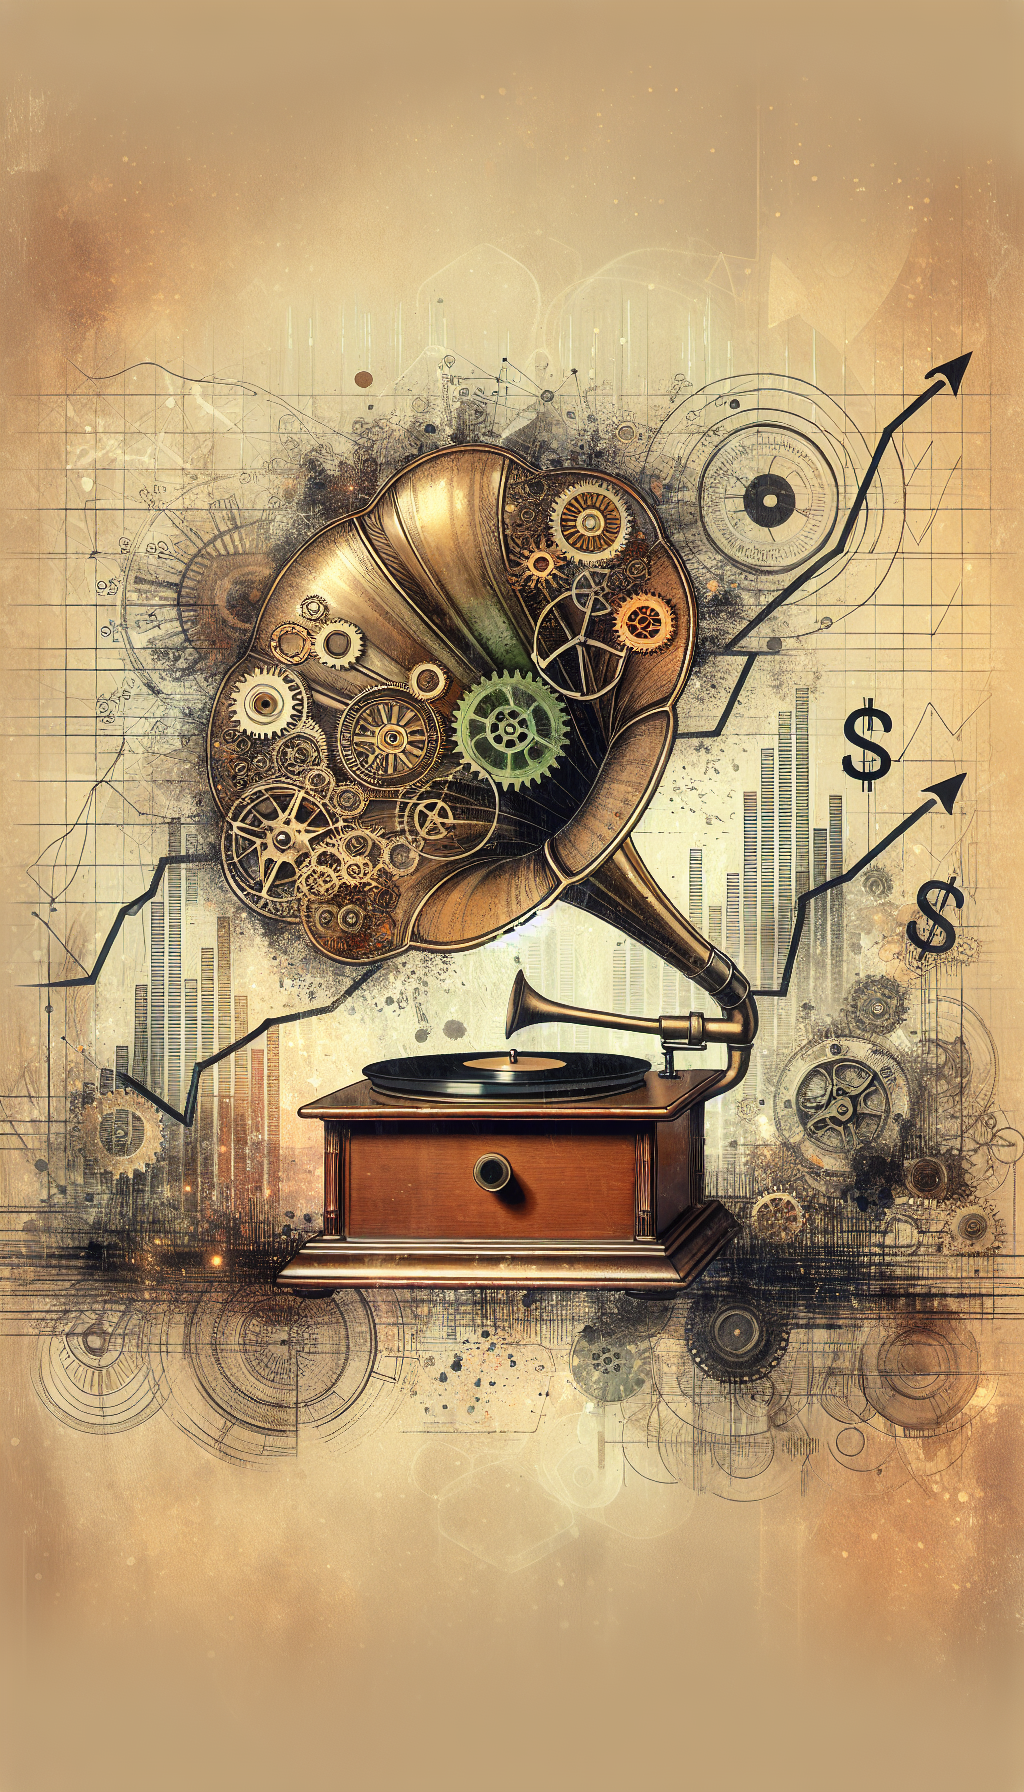 An elegant vintage Victrola player amidst rising graph lines and dollar signs stands as the centerpiece, with intricate gears symbolizing factors like rarity, condition, and brand heritage partially revealed within its open horn. This blend of elements showcases the player's antique value and market dynamics, presented in a mixed media style juxtaposed with sepia tones and watercolor splashes.